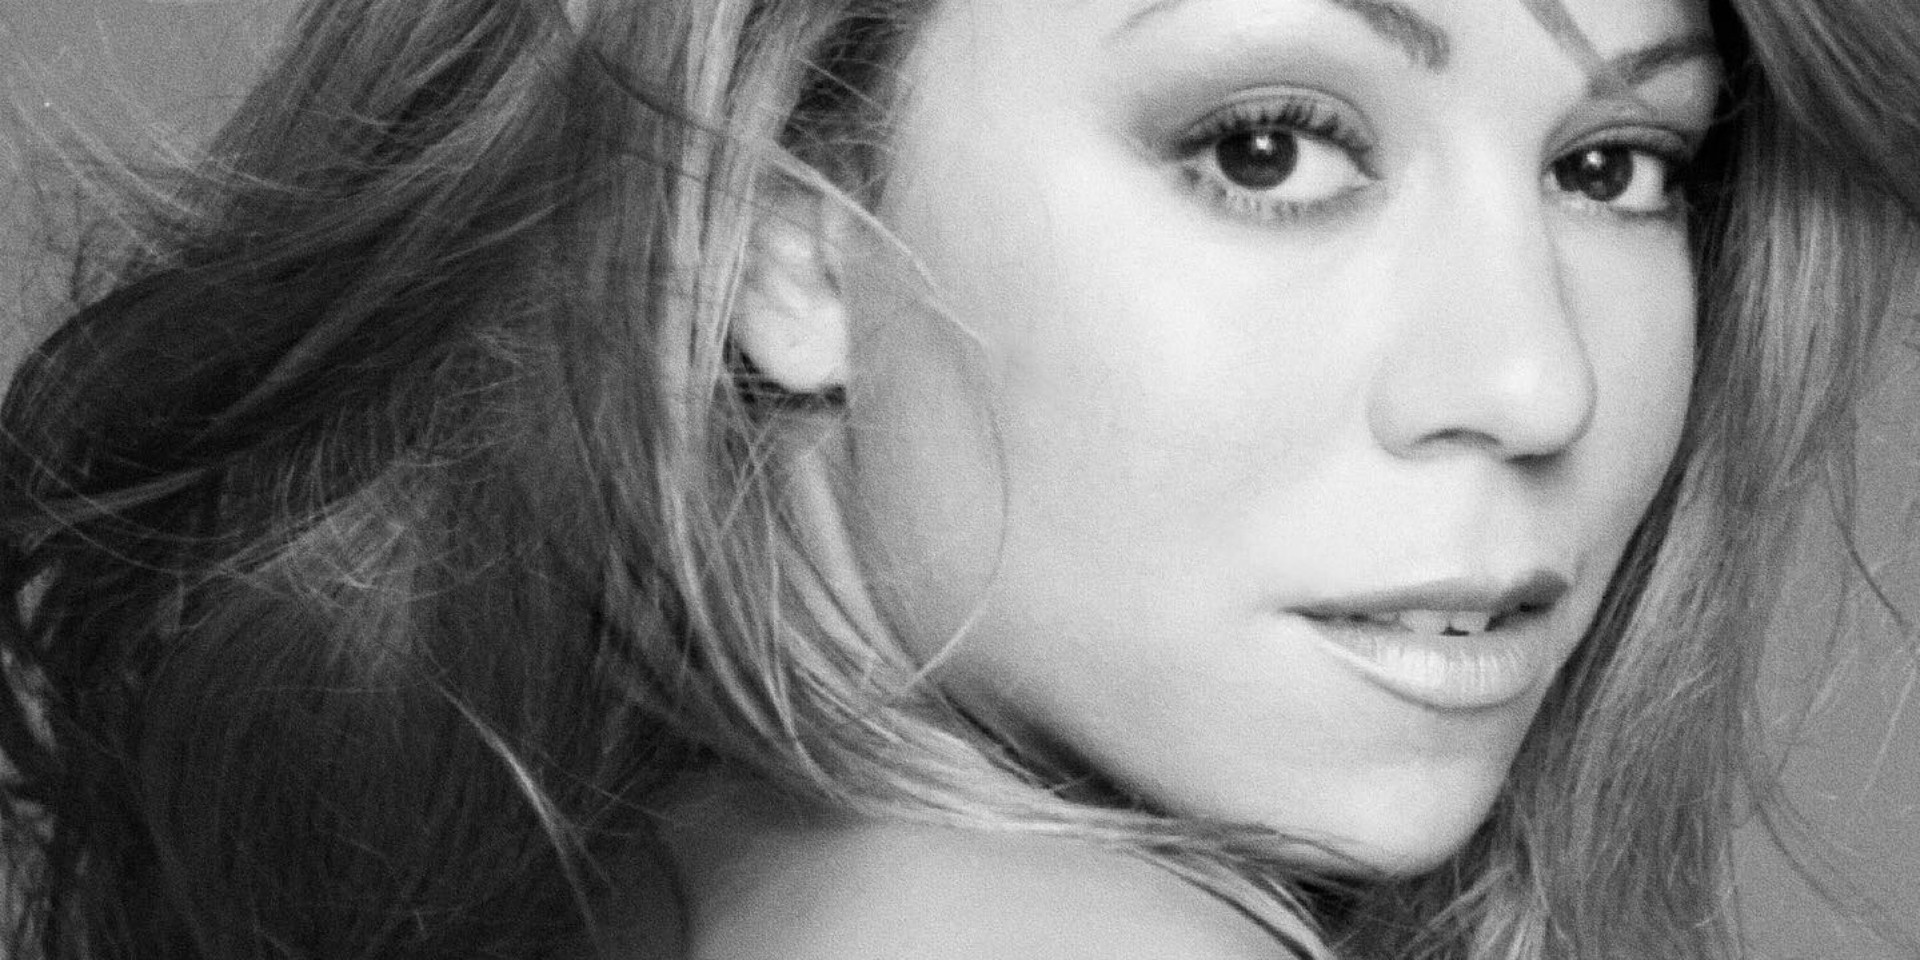 Mariah Carey announces new compilation album 'The Rarities' featuring a track with Lauryn Hill